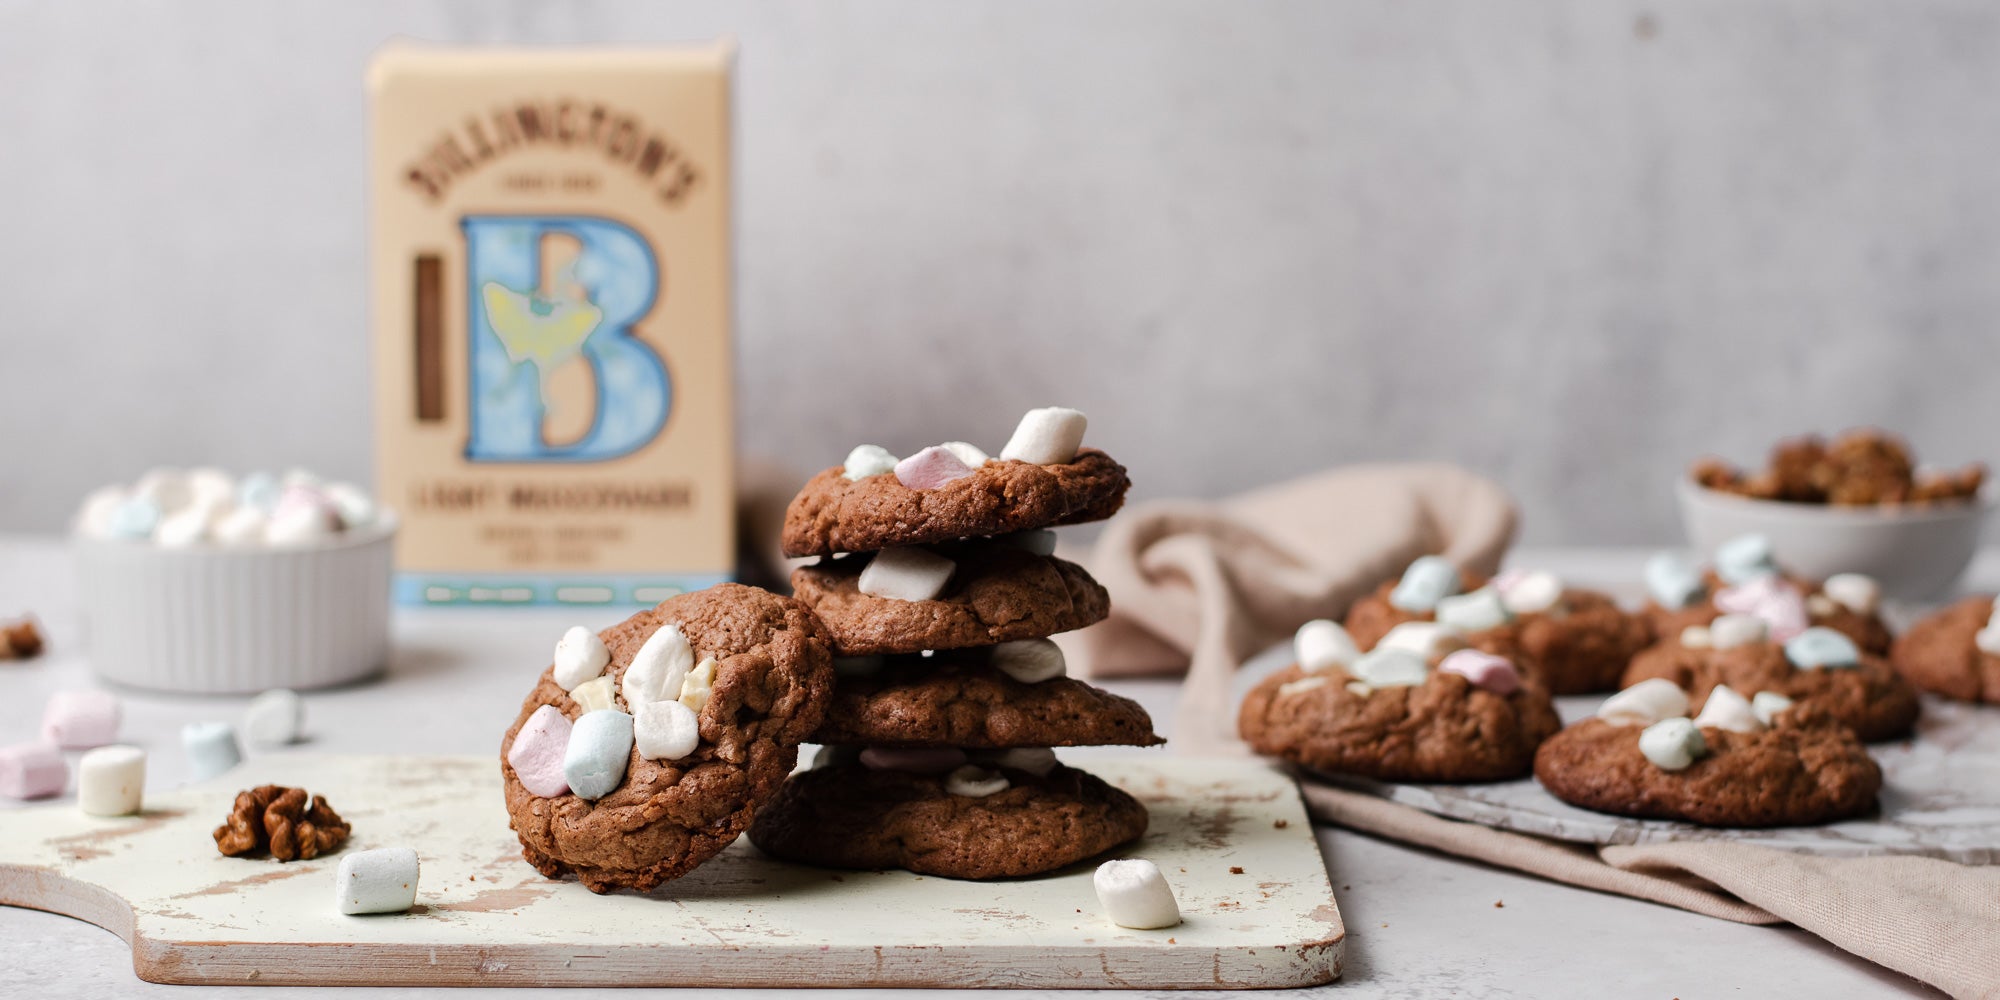 Rocky Road Cookies stacked on top of each other, on a serving board with a box of Billington's Light Muscovado in the background